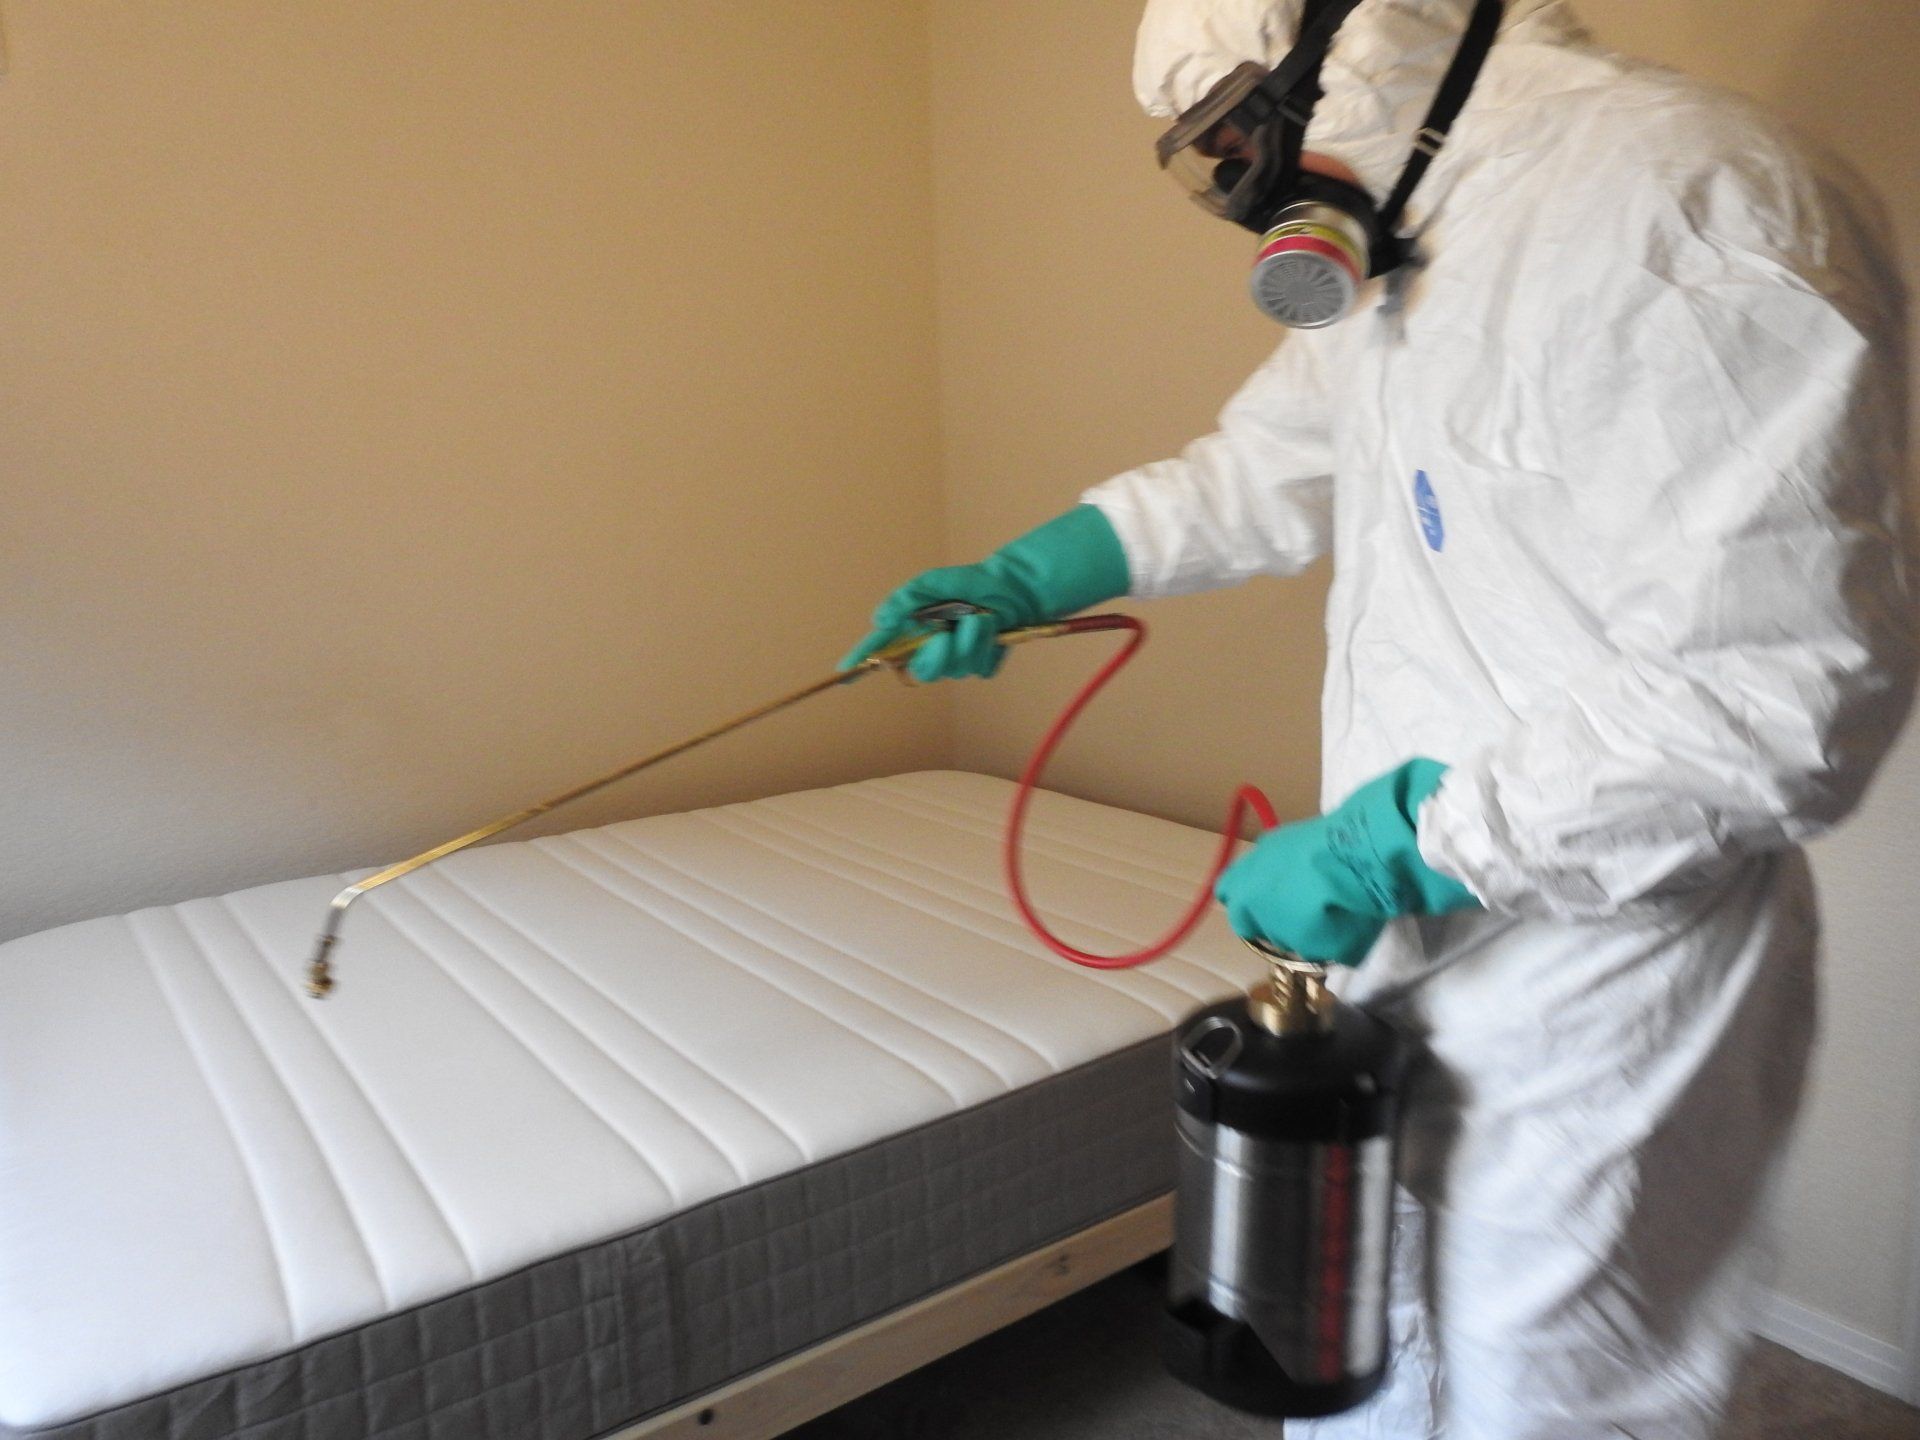 Pest Control Worker with Spraying Equipment — Parker, CO — Konold Pest Control